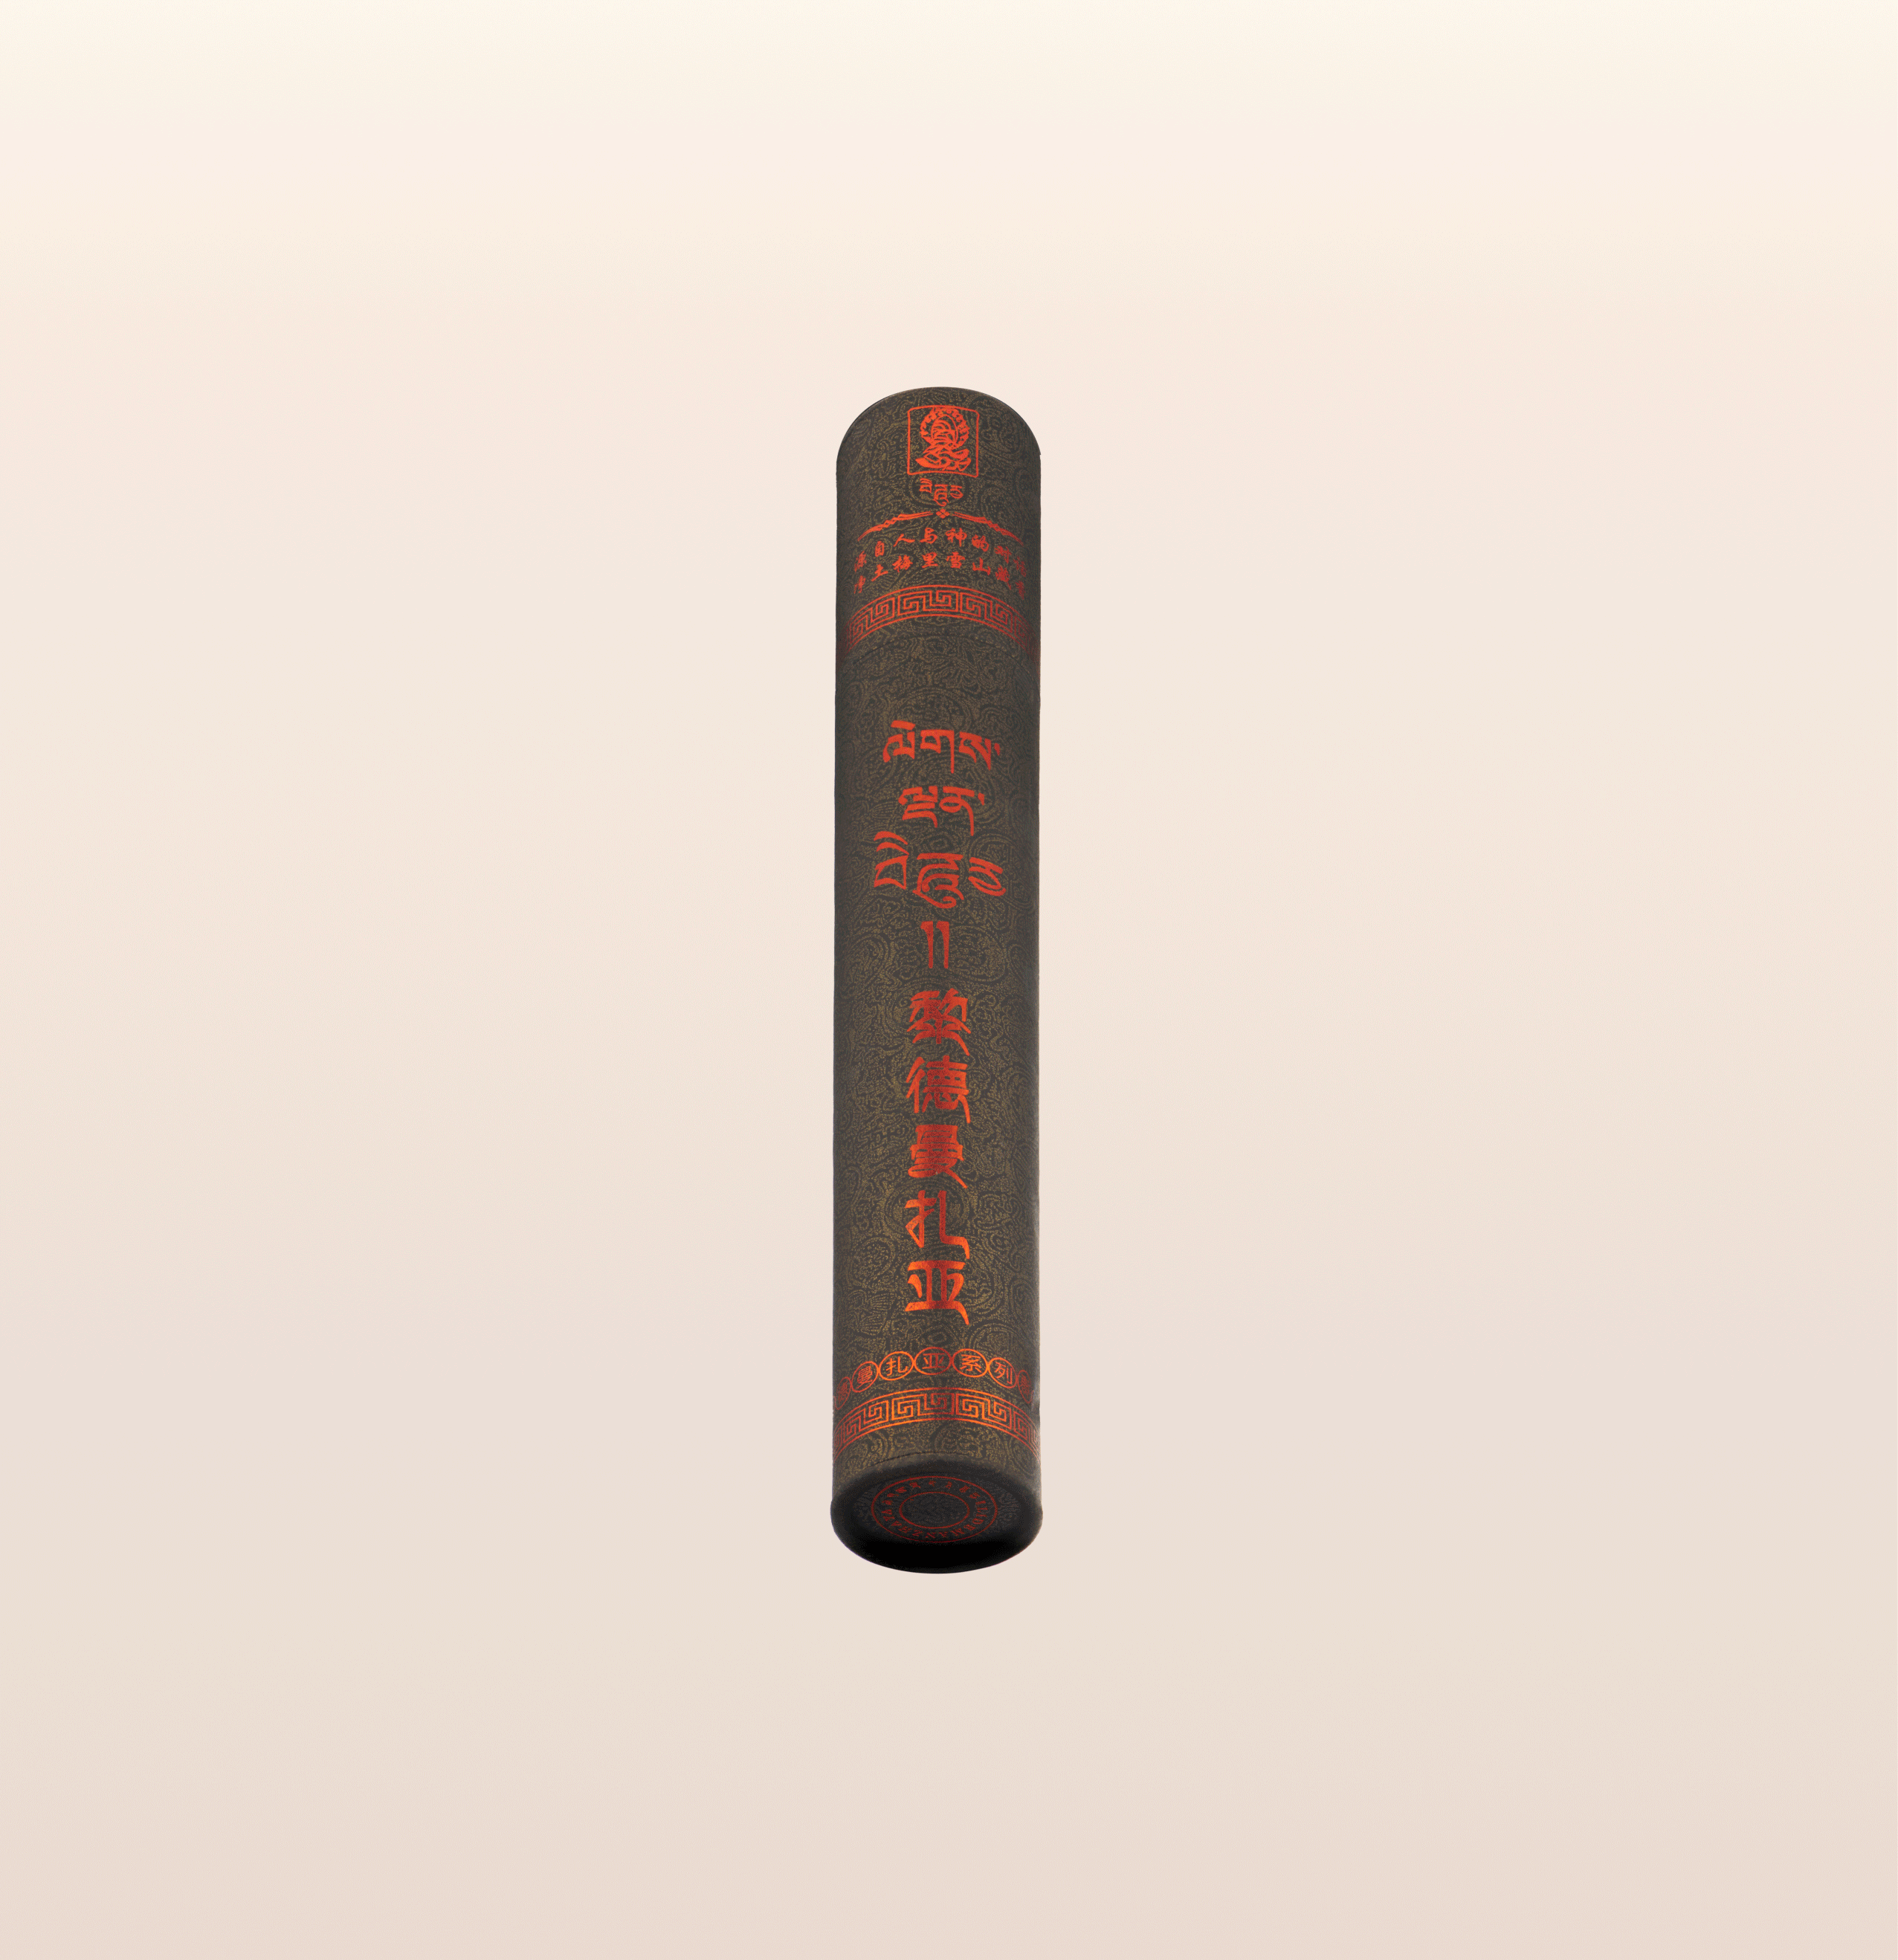 A single, ornately decorated cylinder container with chinese characters is displayed against a plain, light background.